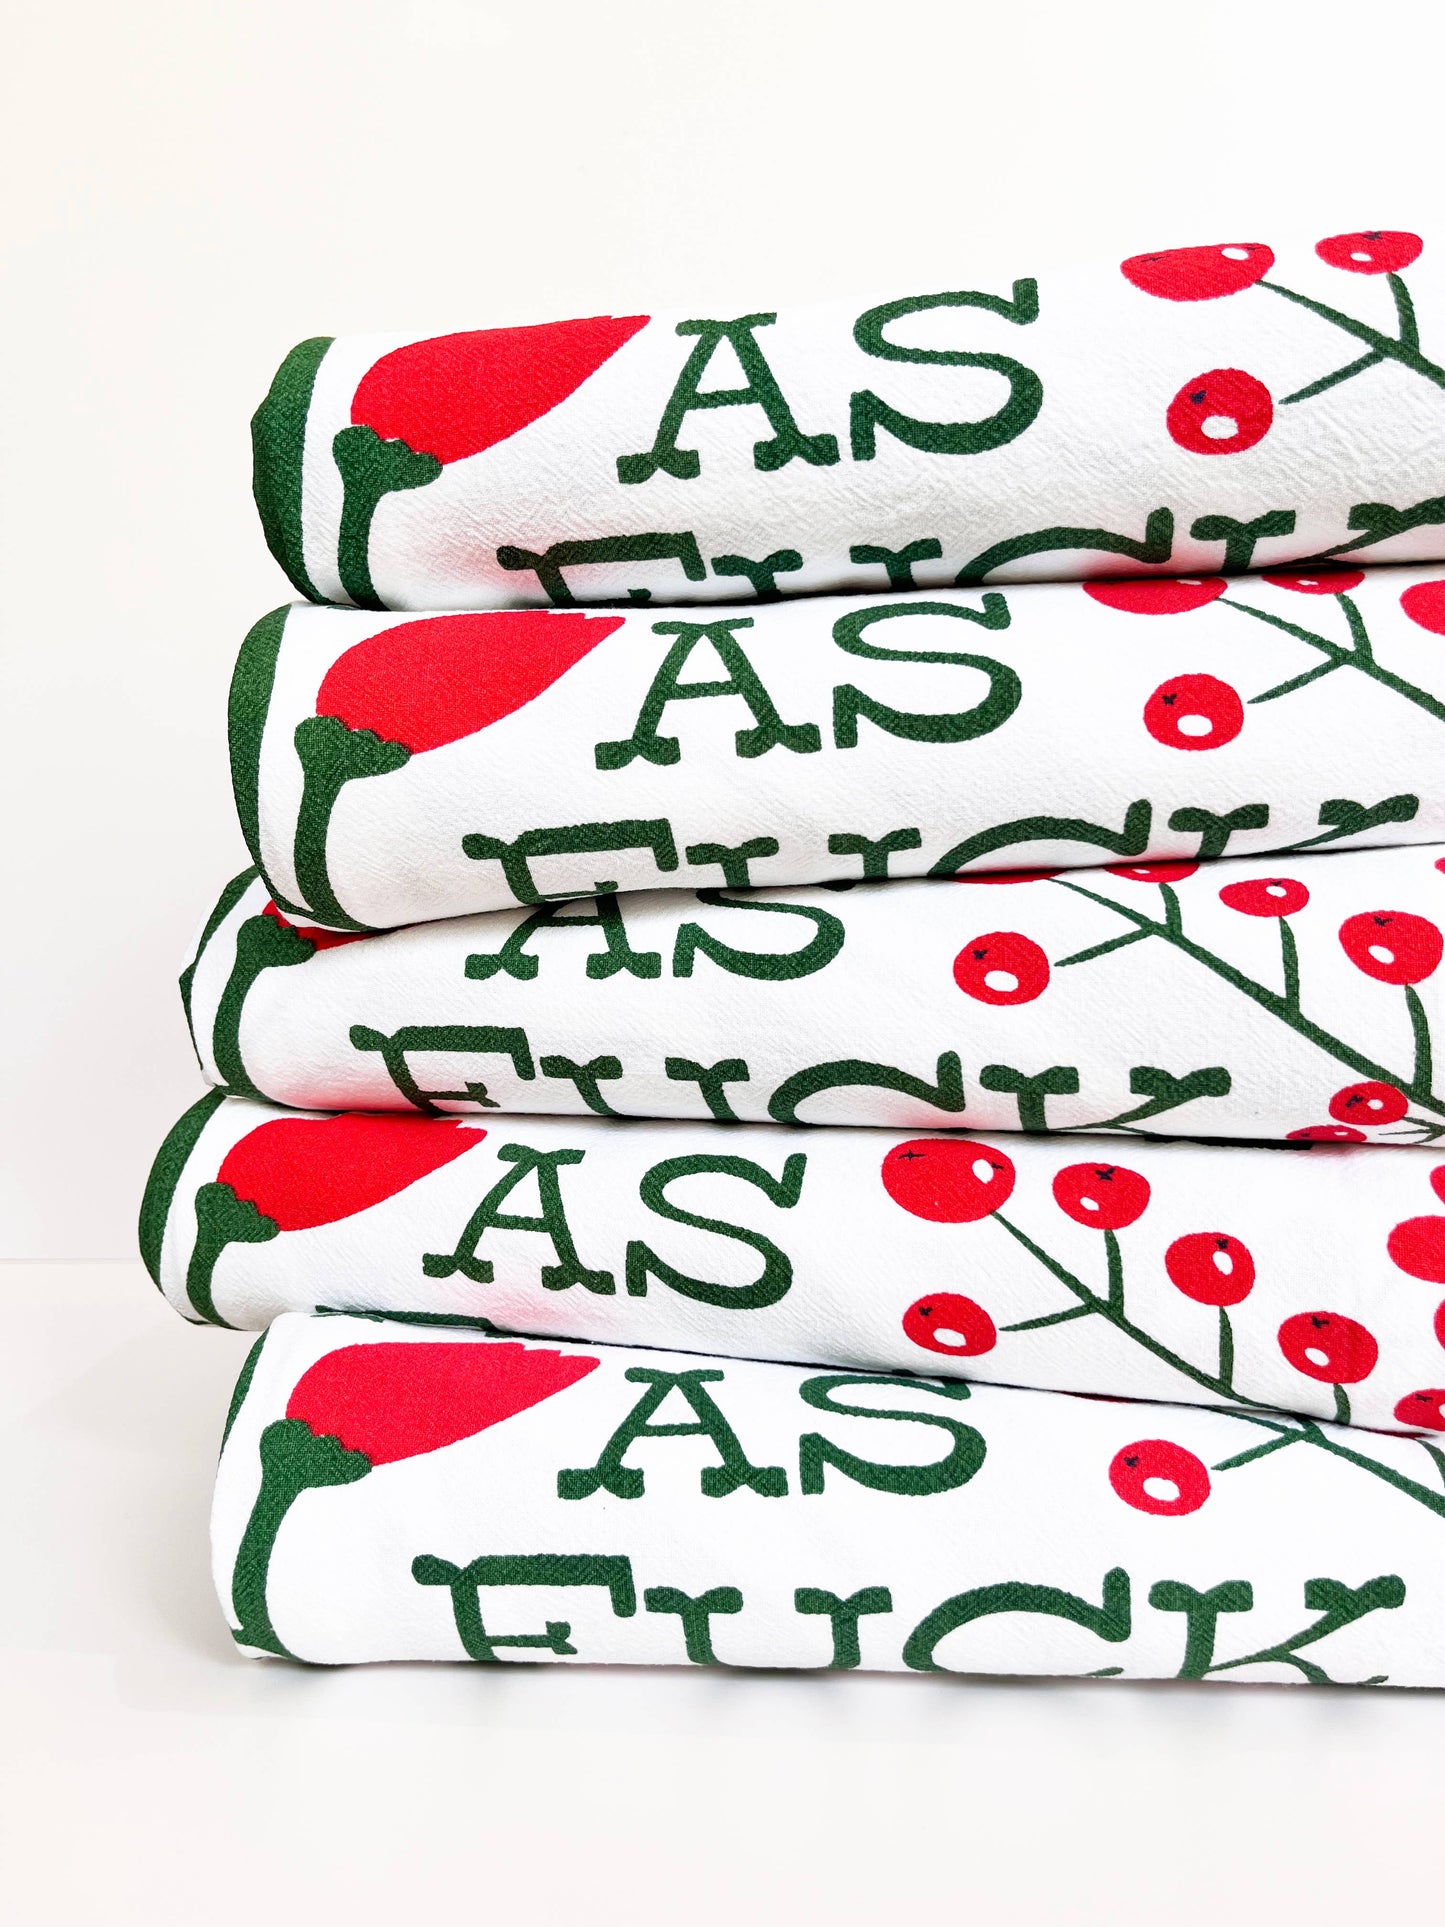 Festive as Fuck Red Green Christmas Holiday Kitchen Towel